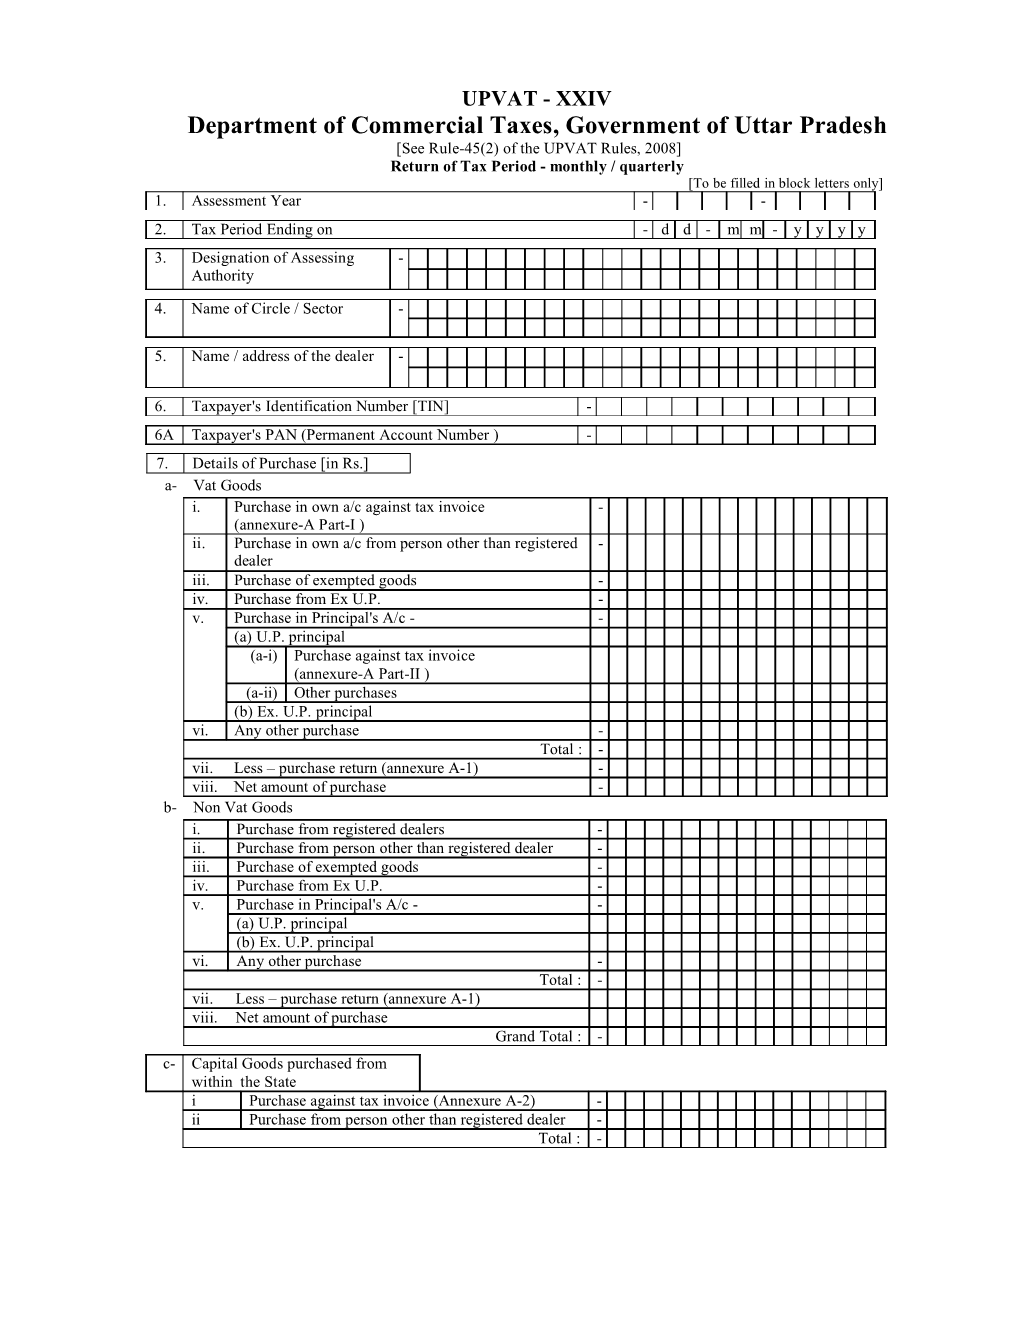 Form-24 for Annexure